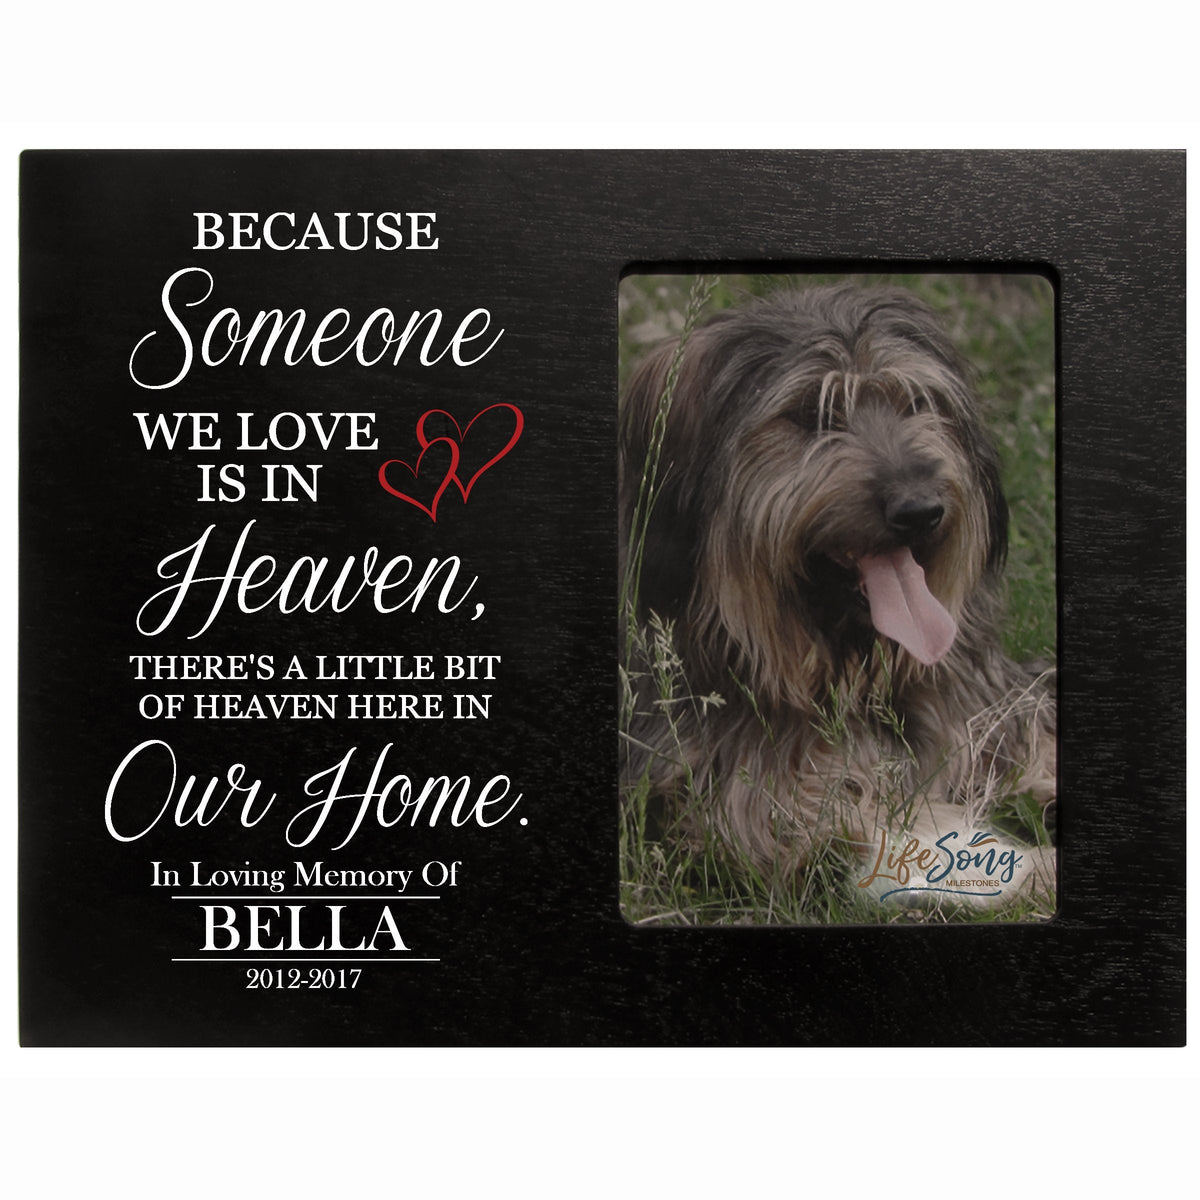 8x10 Black Pet Memorial Picture Frame with the phrase &quot;Because Someone We Love Is In Heaven&quot;